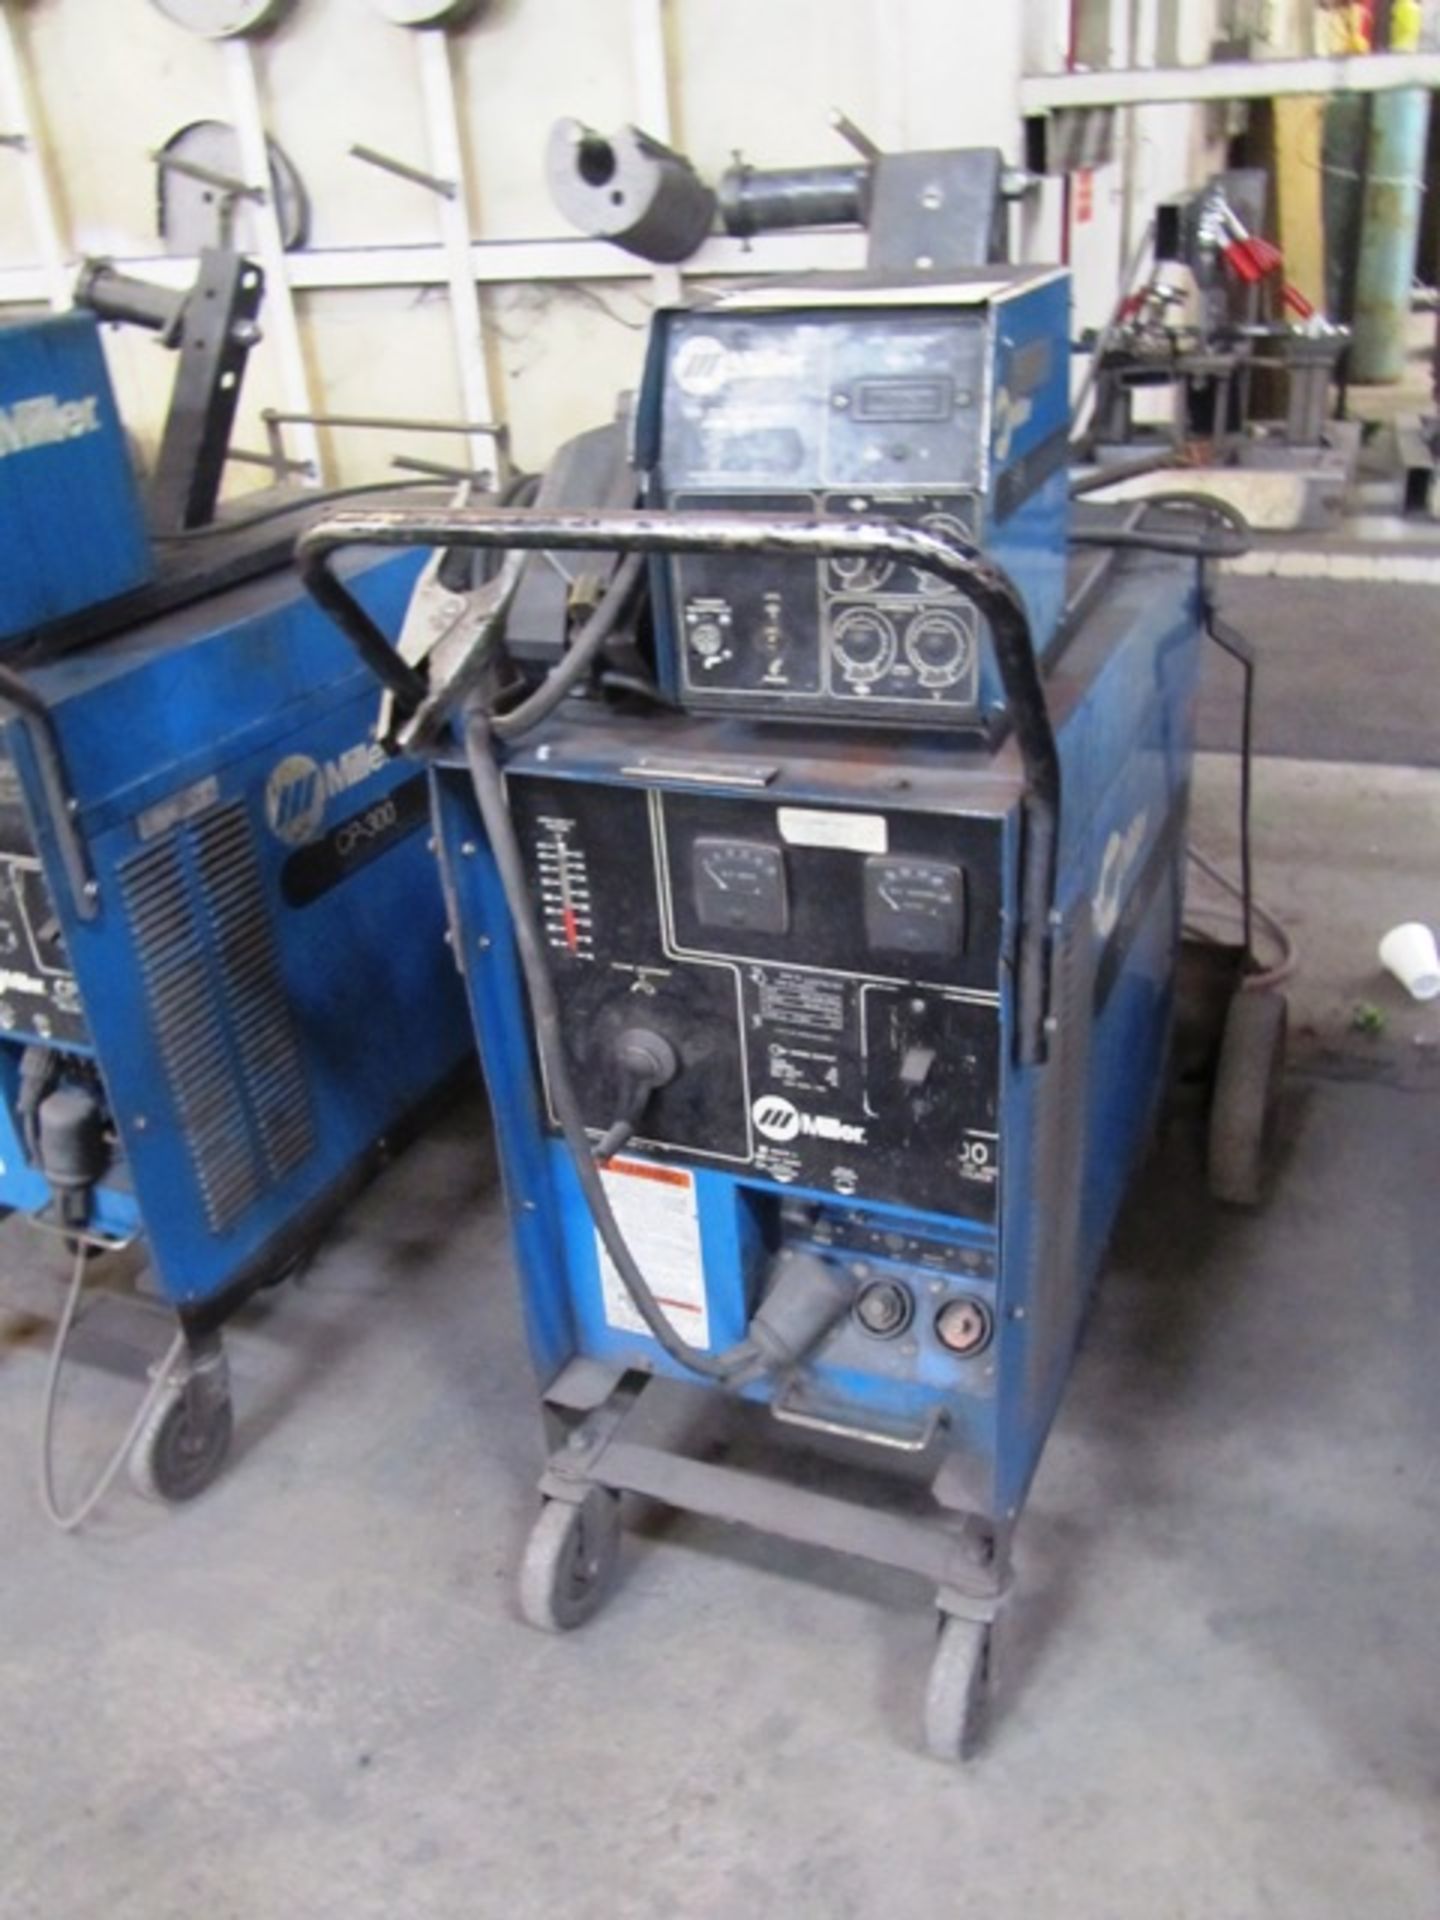 Miller CP-300 Portable Mig Welder with Miller S-60 24V Constant Speed Wire Feeder (may need repair)